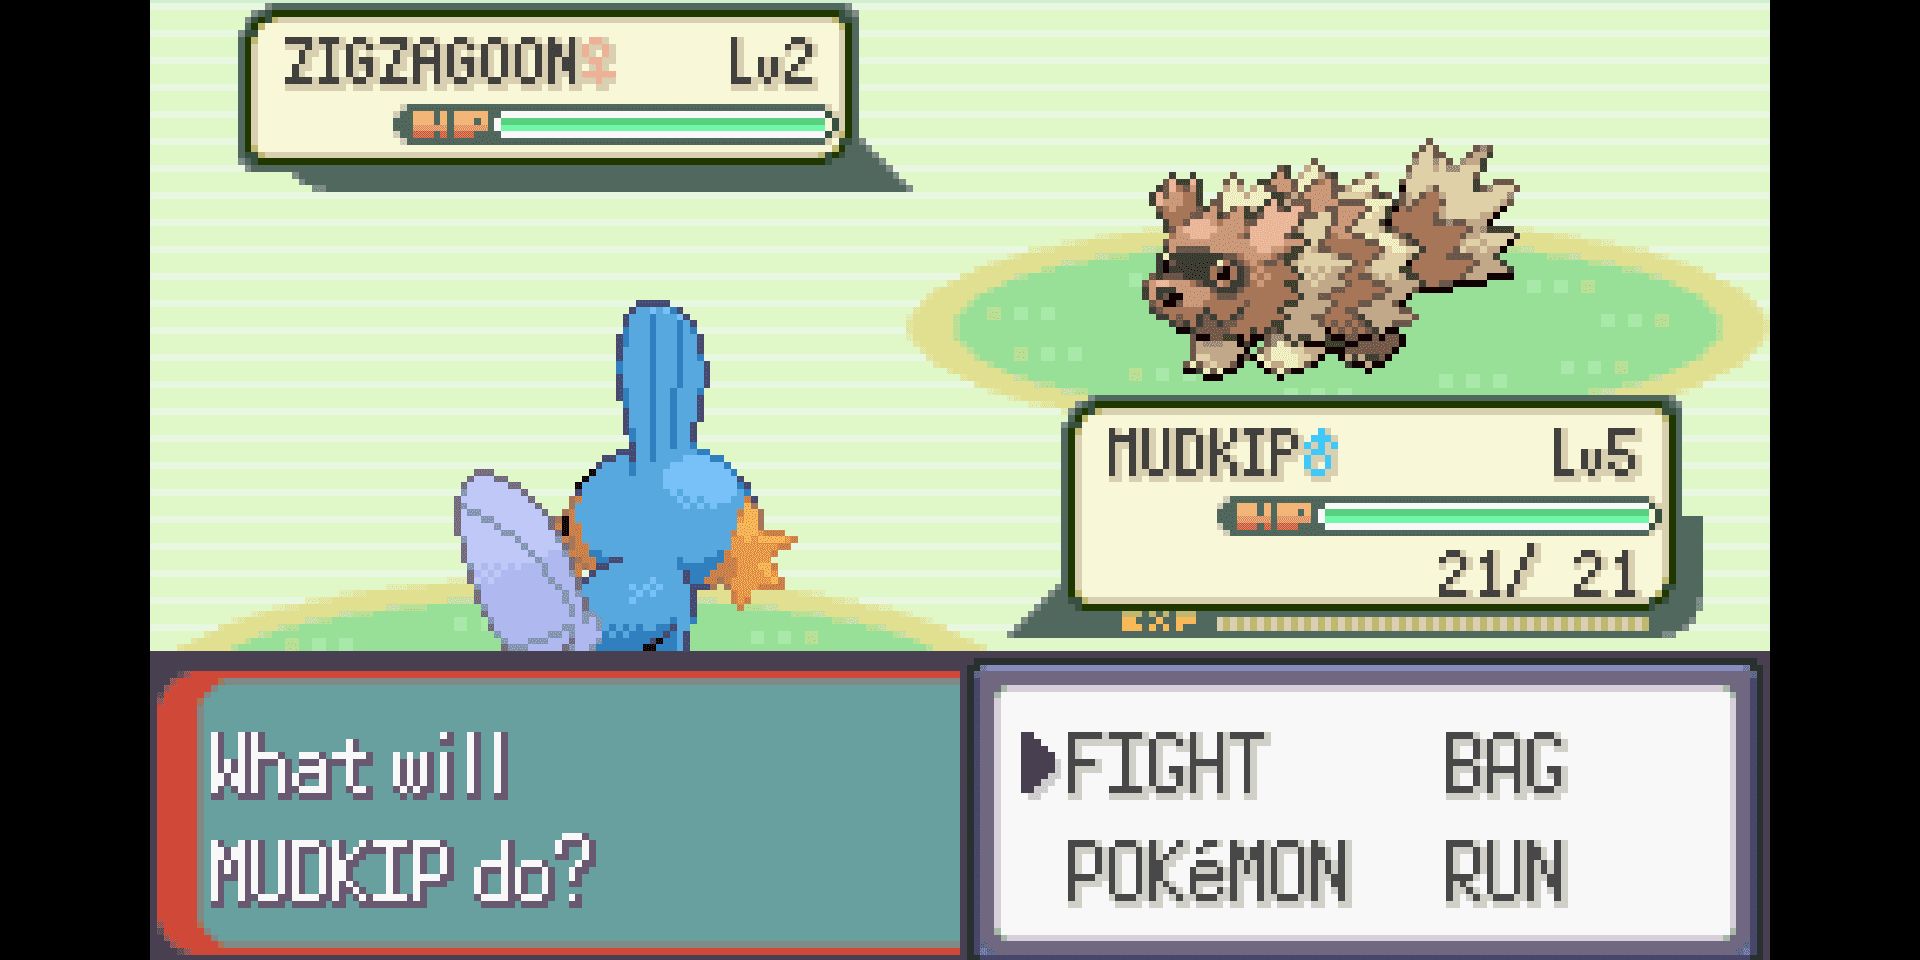 The player's Mudkip faces off against a Zigzagoon in Pokemon Emerald